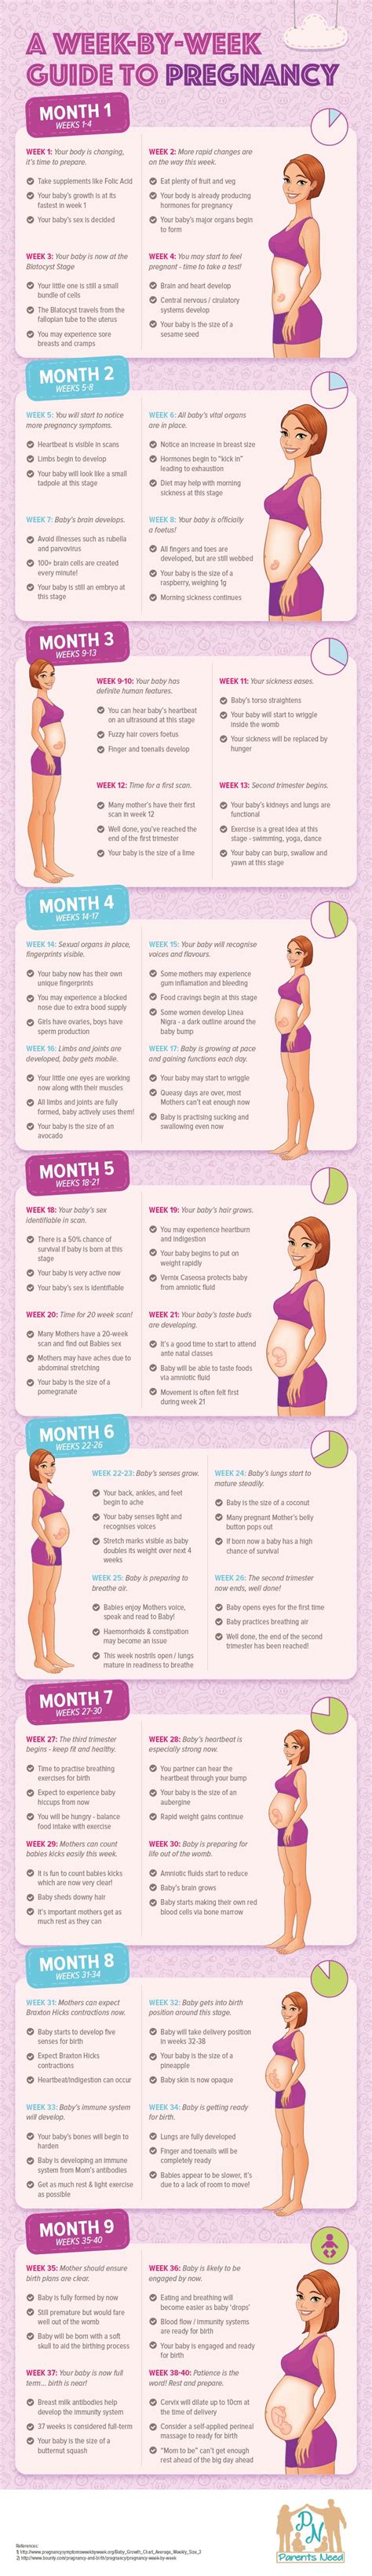 infographic a week by week guide to pregnancy